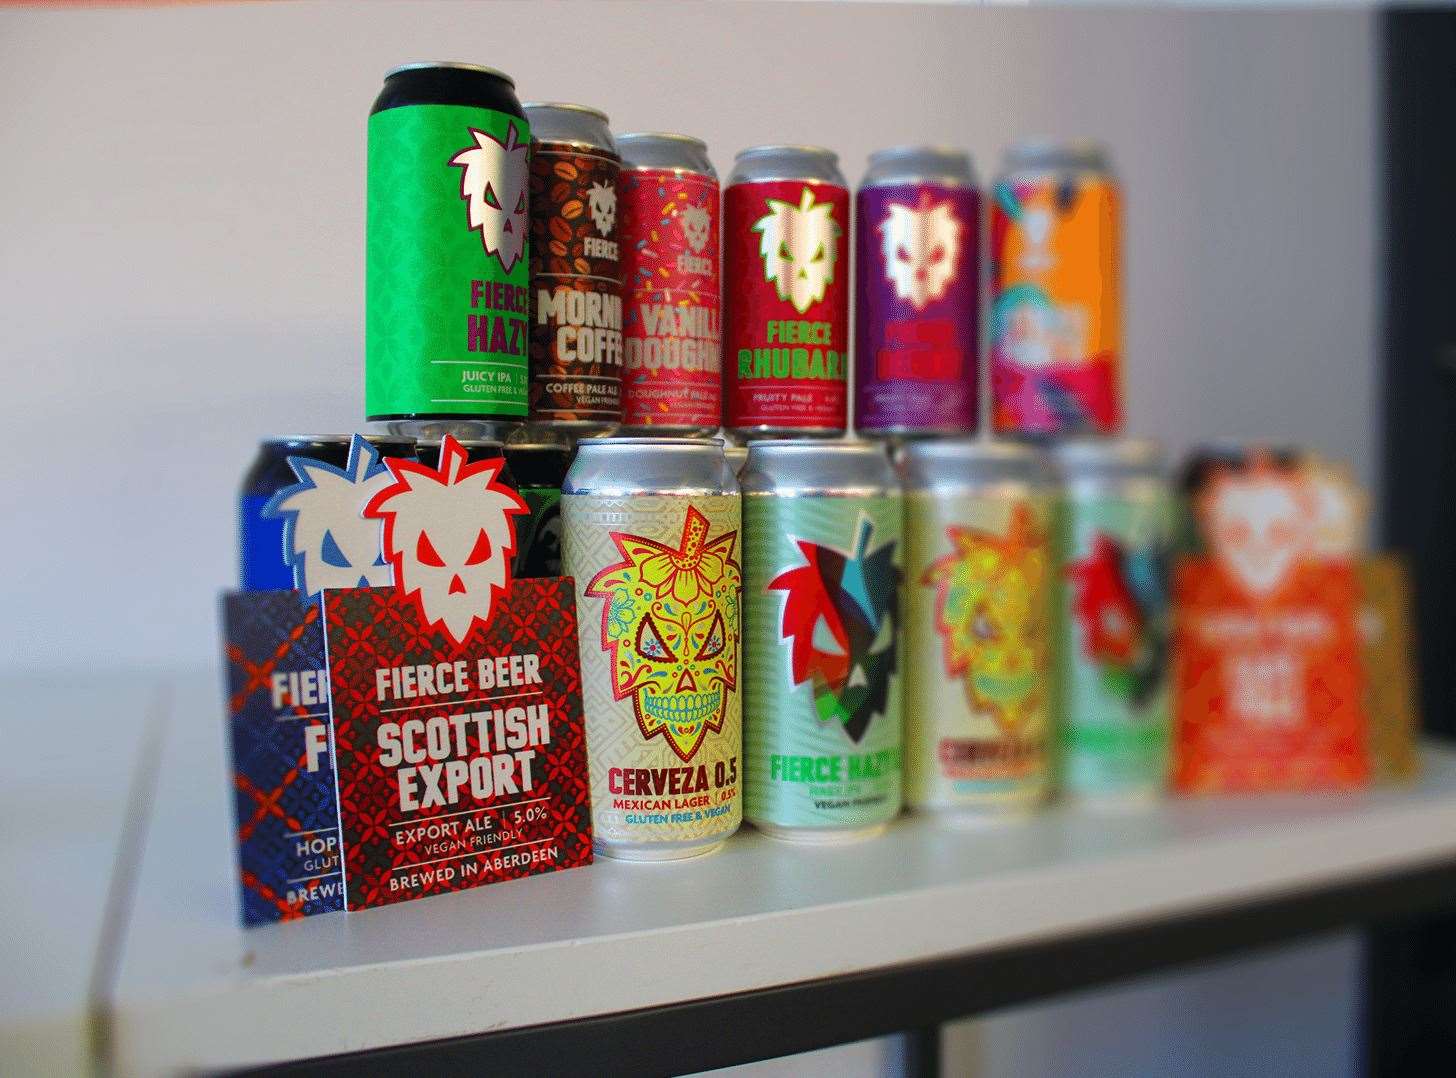 The challenge for students aims to consider how their fresh perspective can help Fierce Beer increase their market share within the low ABV beverages sector.